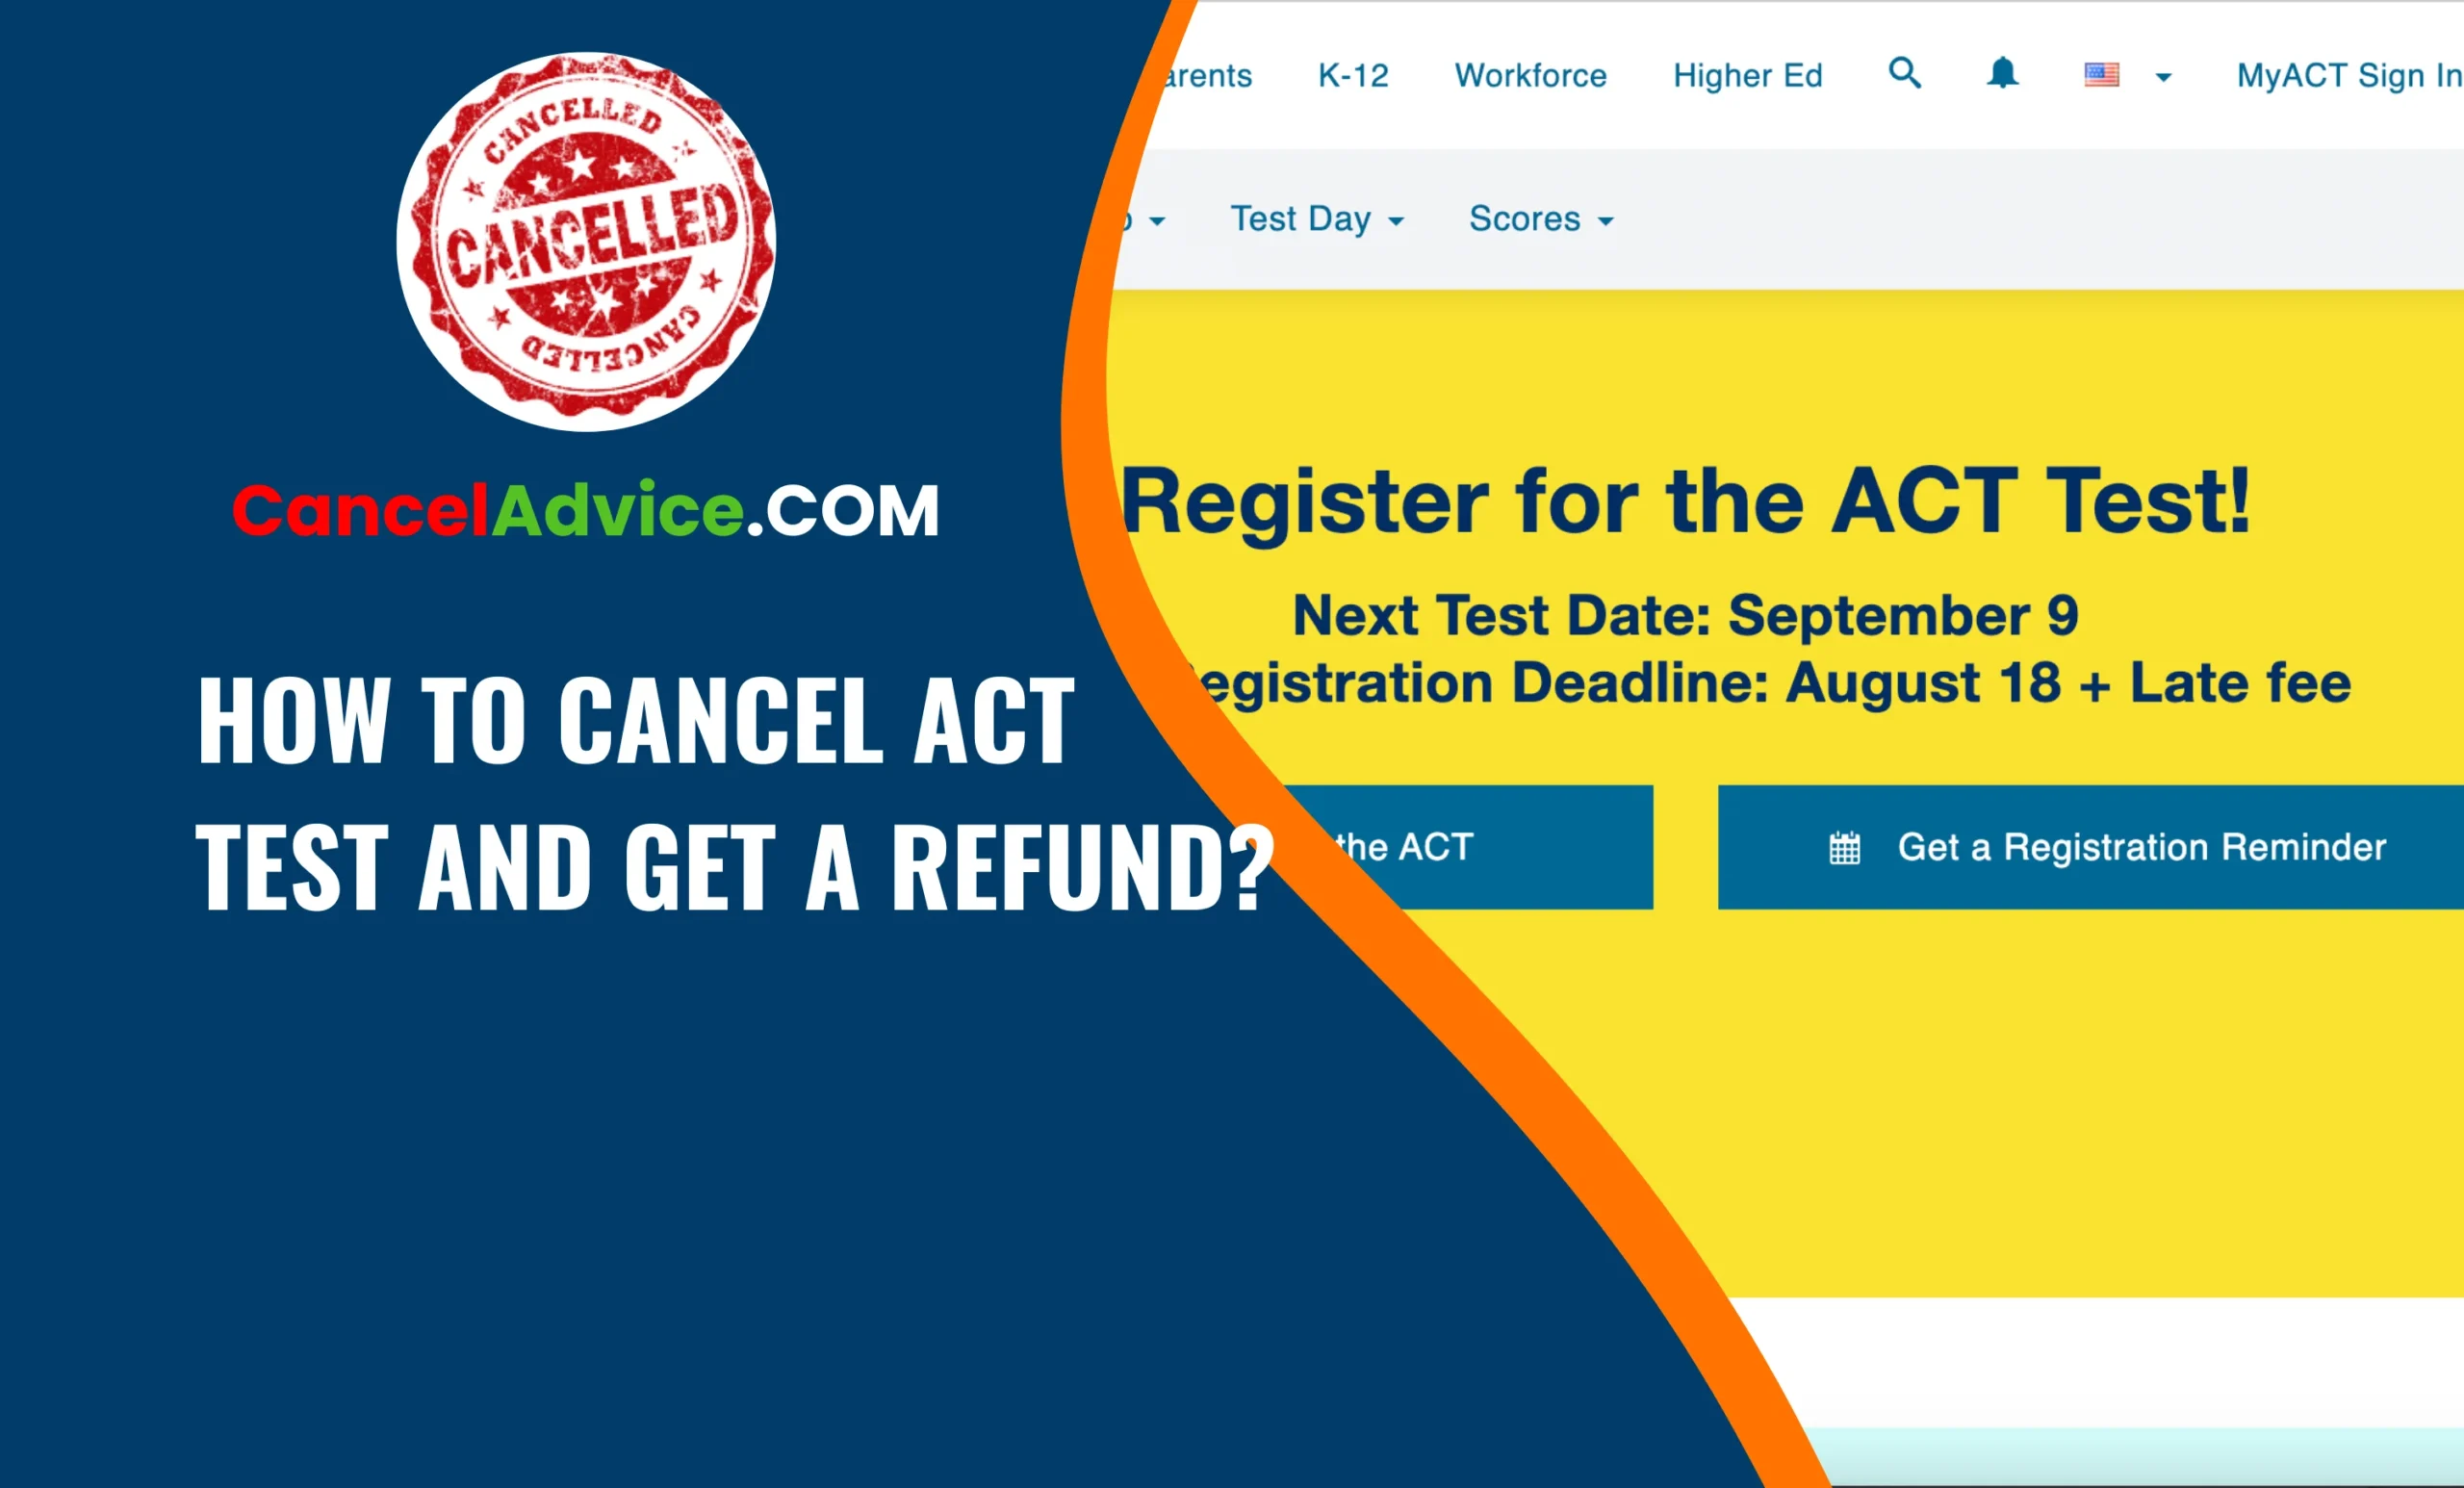 How To Cancel Act Test And Get A Refund